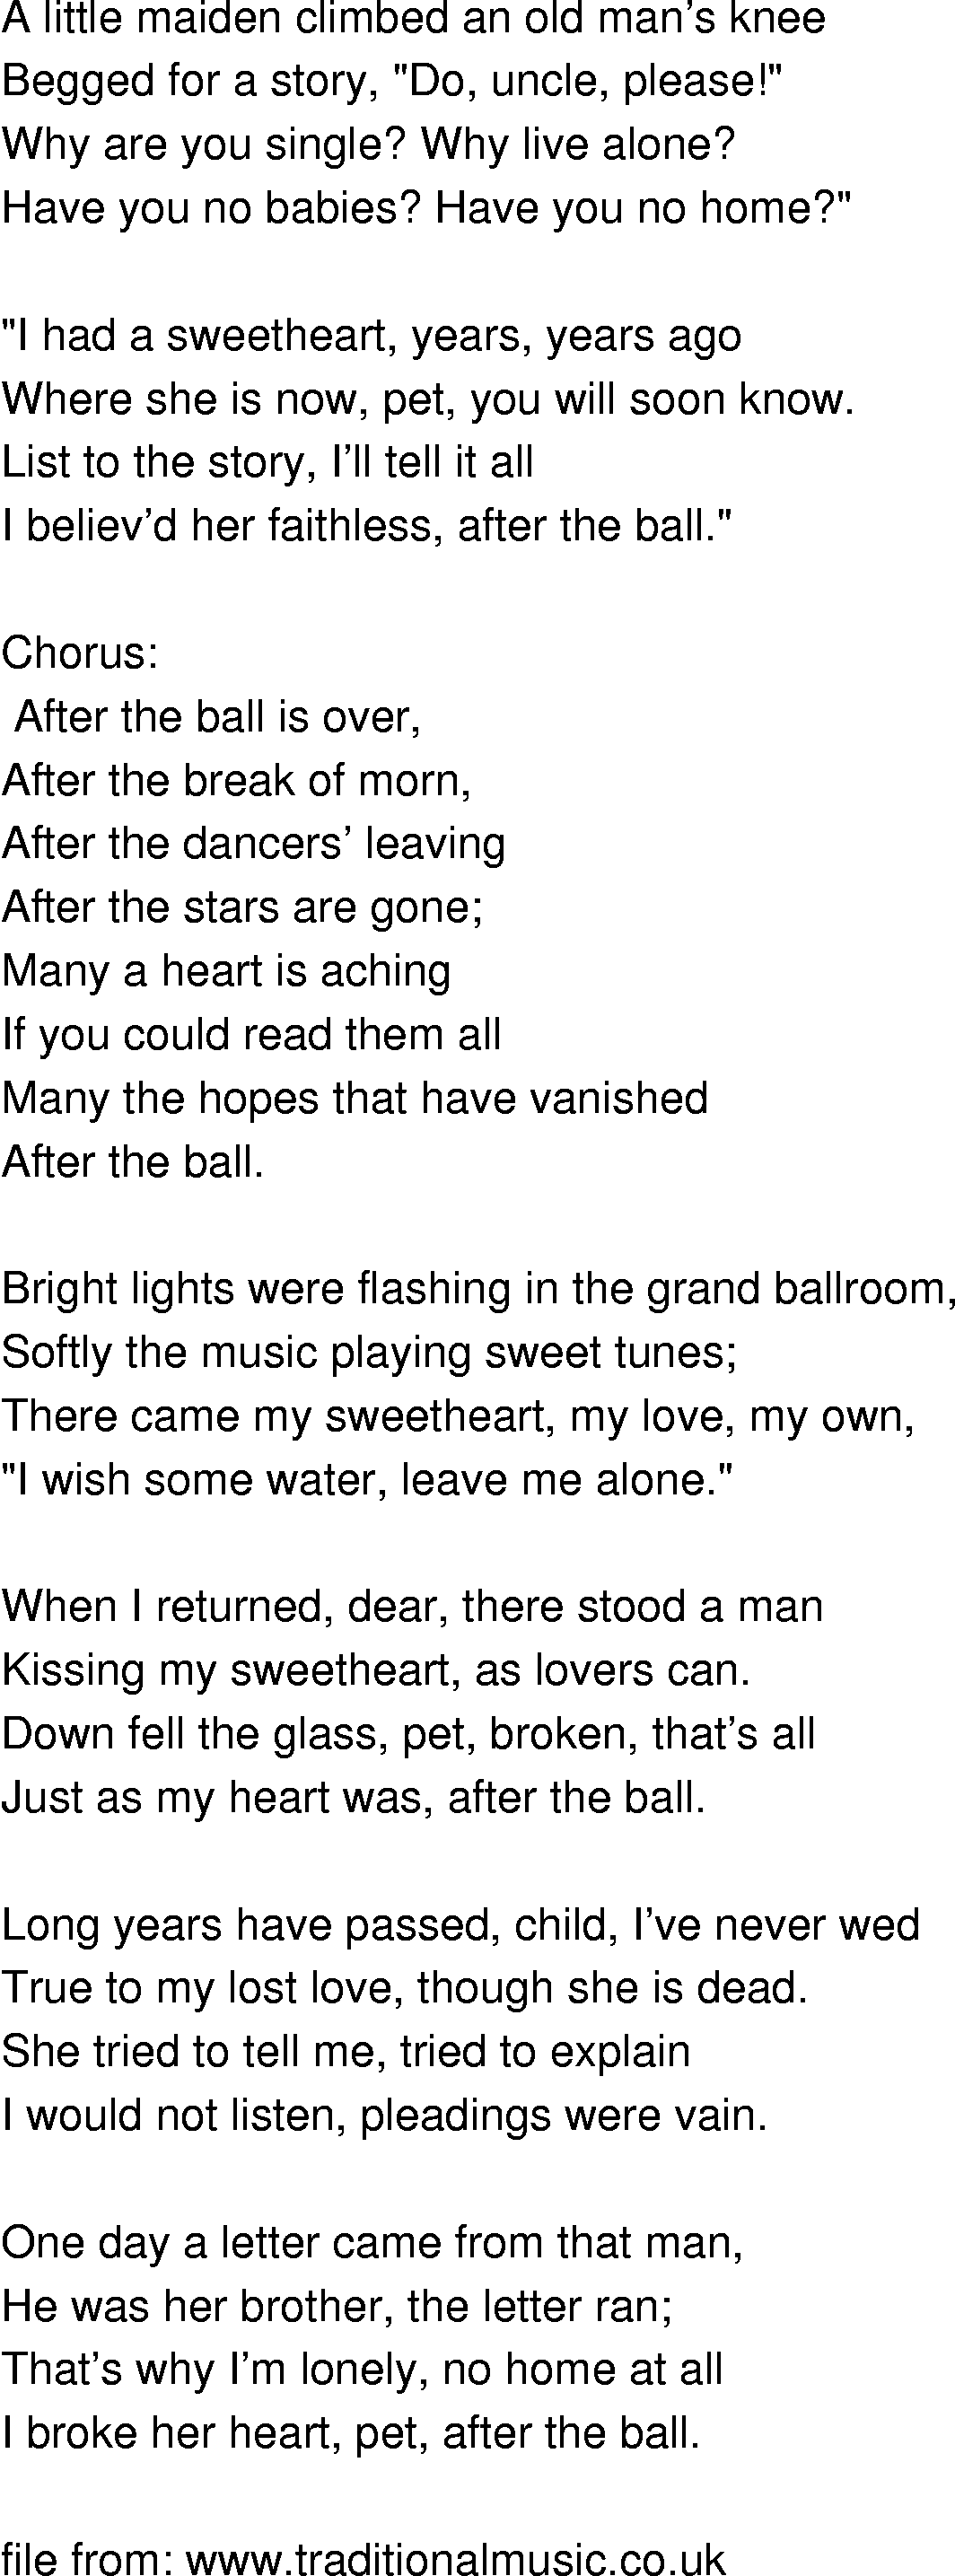 Old-Time (oldtimey) Song Lyrics - after the ball